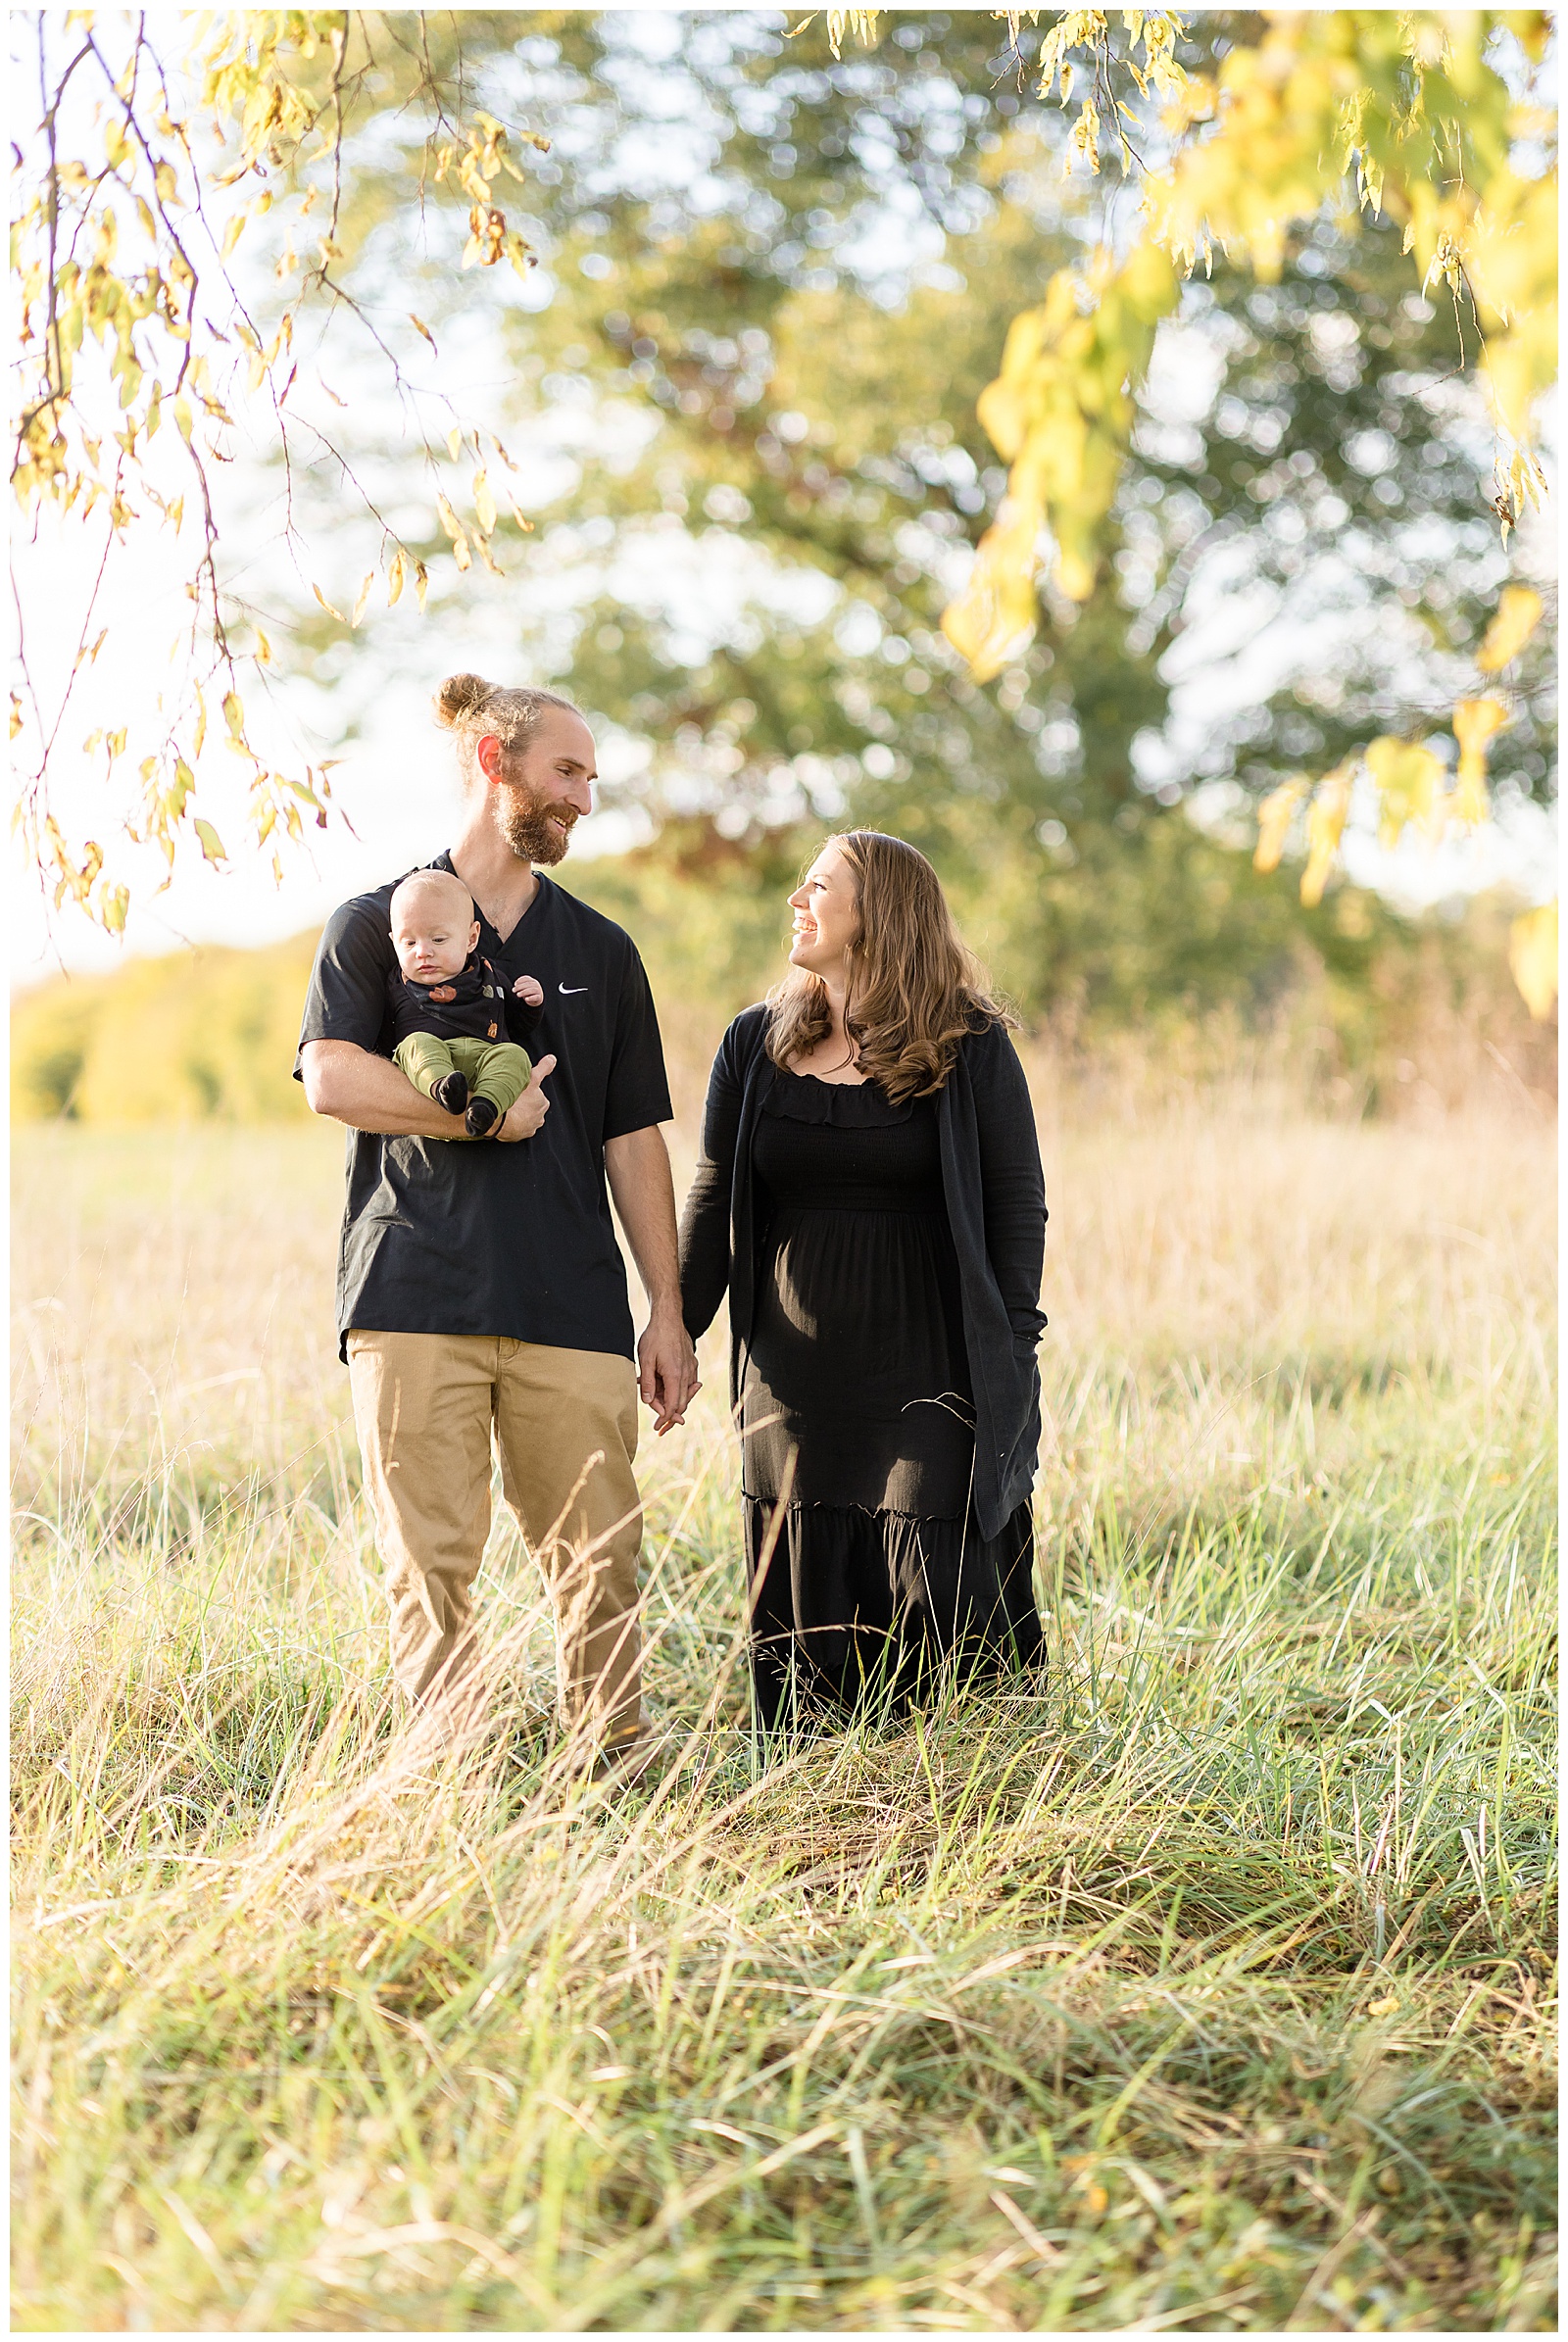 Husband and wife look at each other as they walk through a field in Richmond, VA with their baby boy who is being held by Dad.